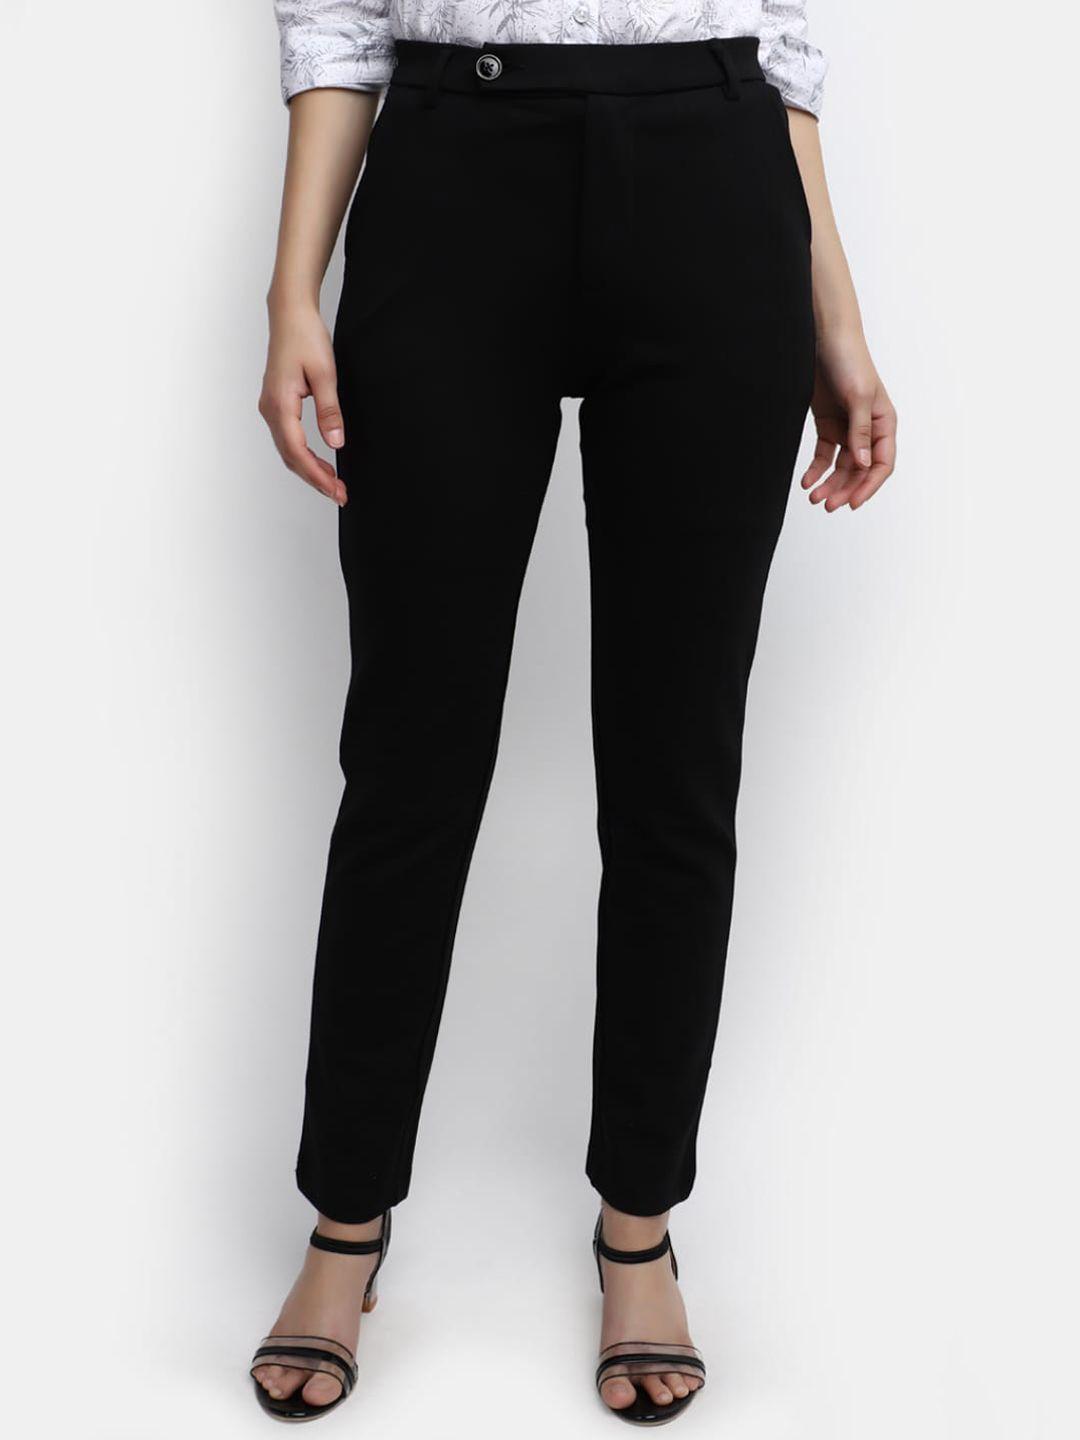 v-mart-women-clean-look-mid-rise-cotton-formal-trousers